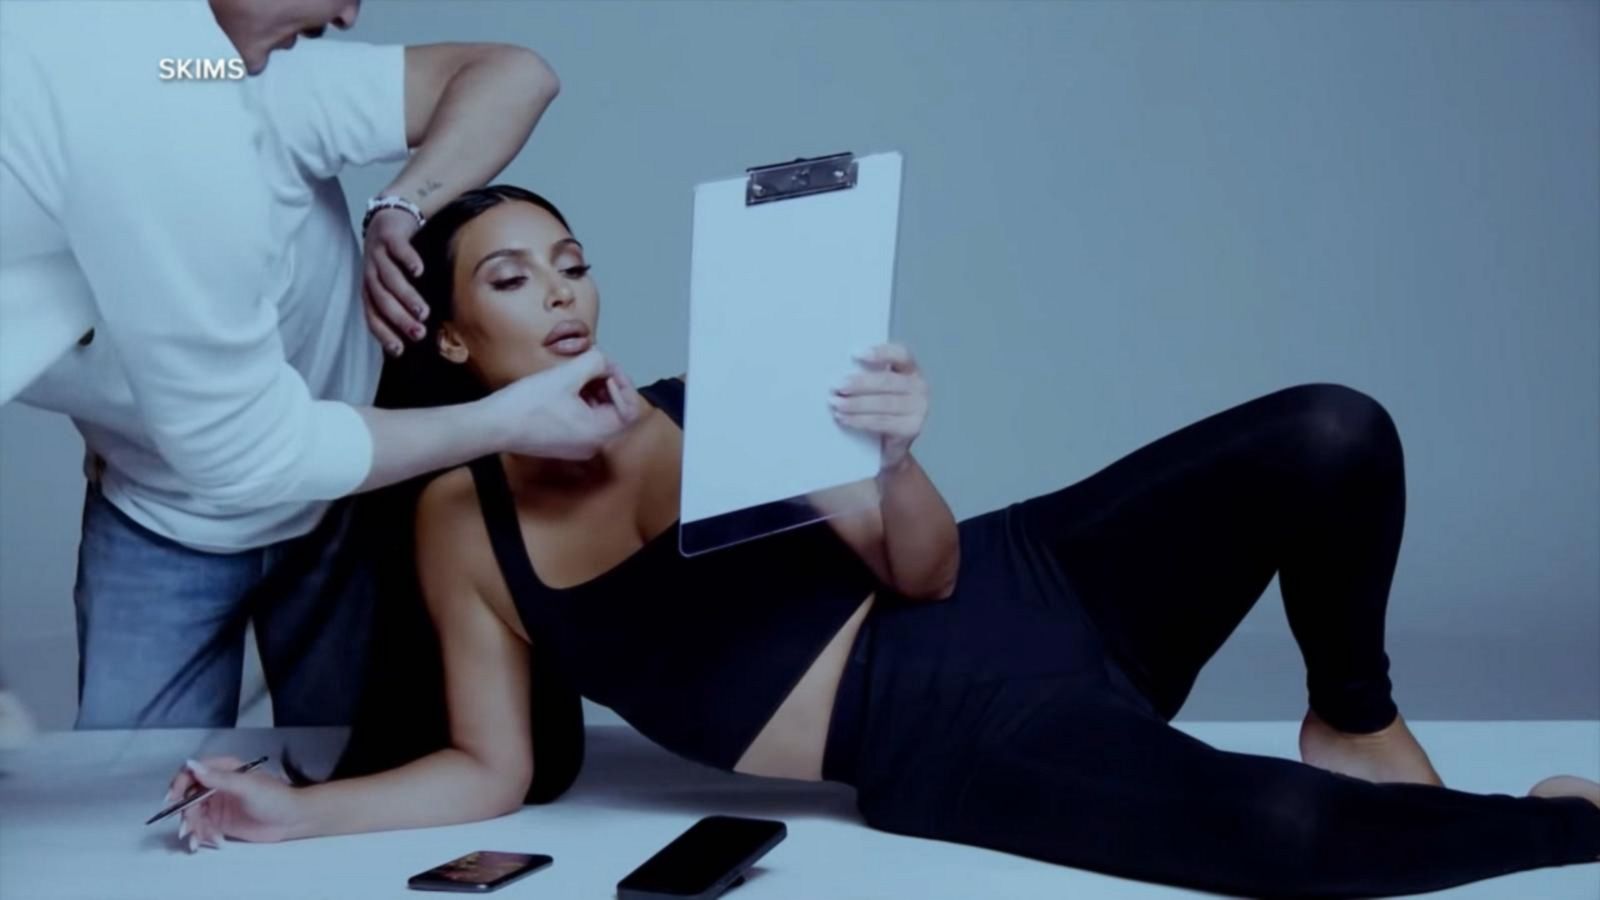 Just what we need, Kim K's maternity shapewear to cure your